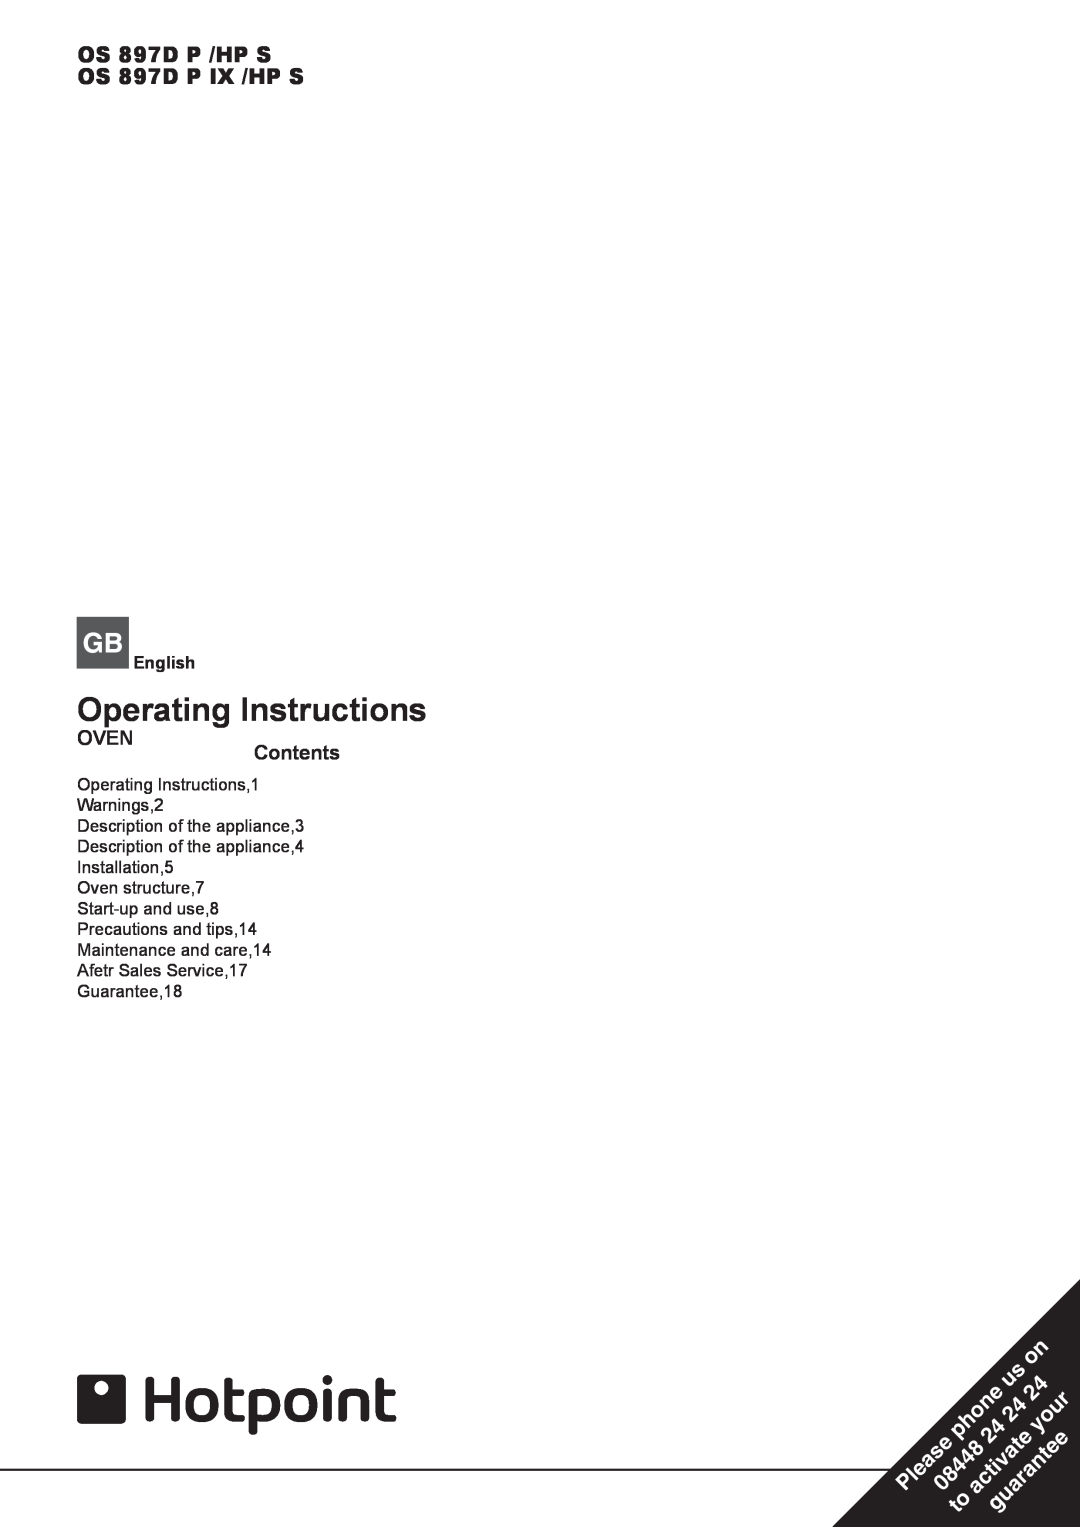 Hotpoint manual Operating Instructions, OS 897D P /HP S OS 897D P IX /HP S, OVENContents, English, phone, your 